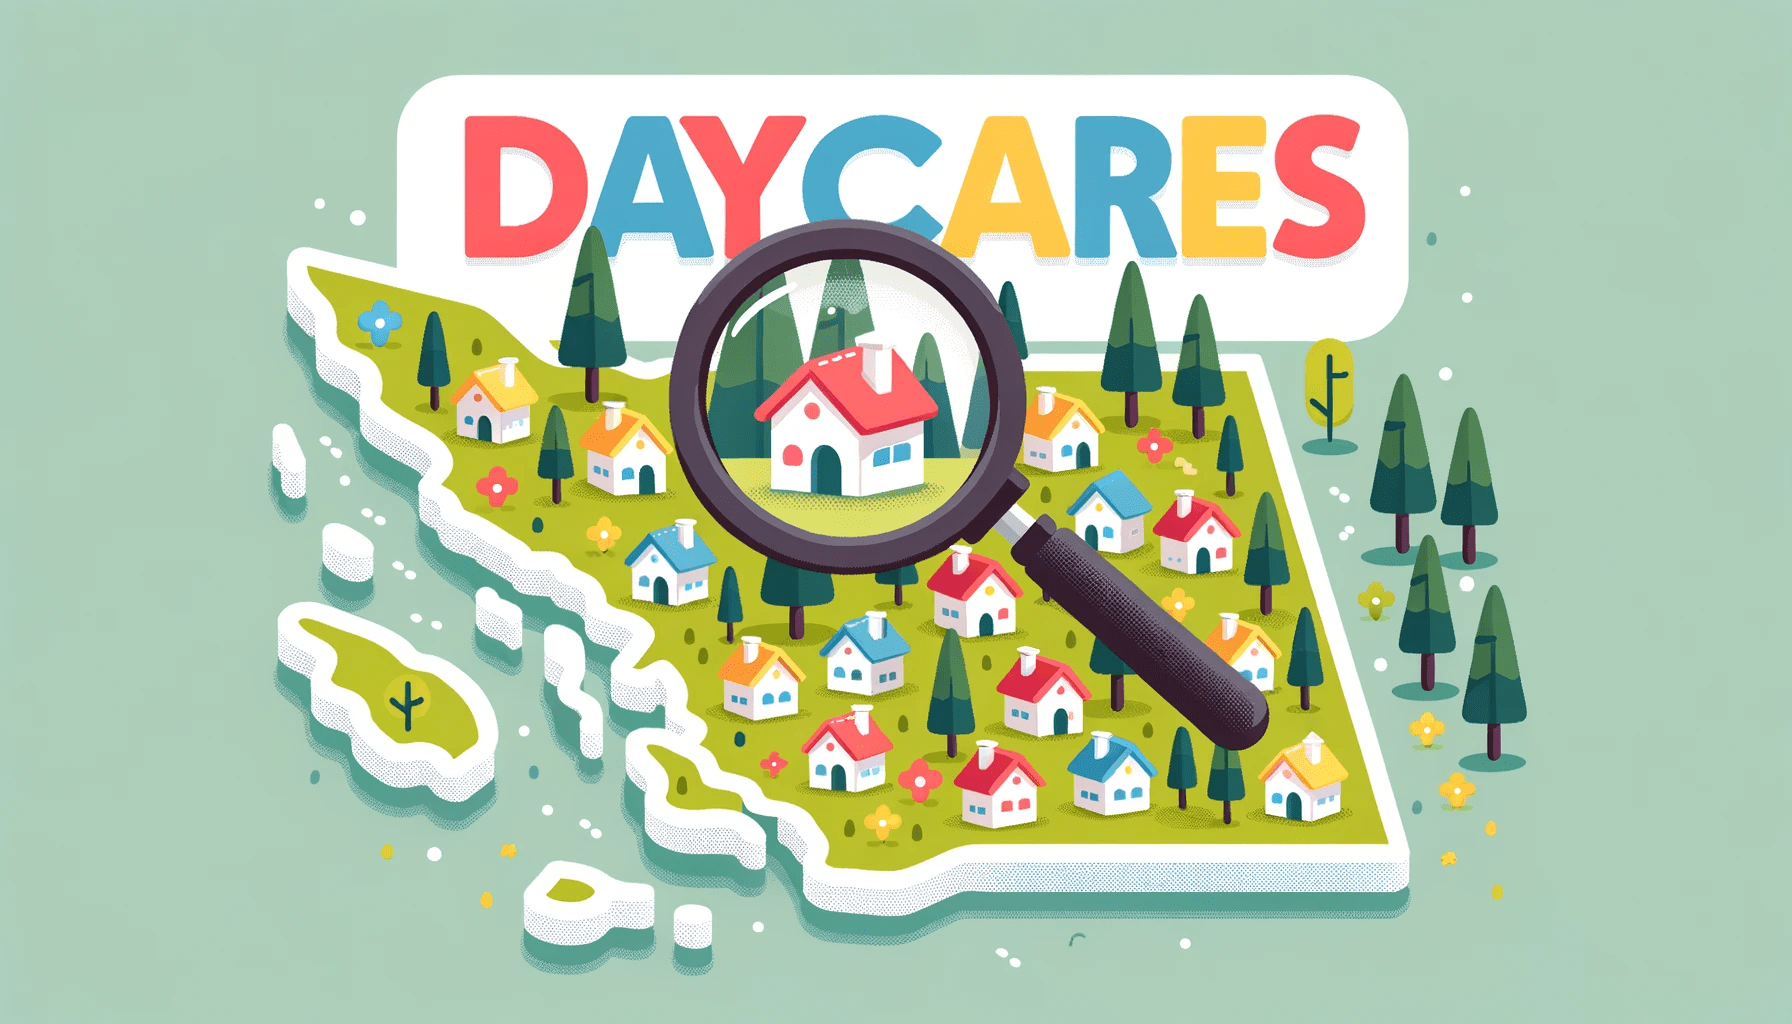 Illustration of a map of British Columbia with cartoon icons of little houses and trees, each house representing a daycare. A magnifying glass hovers over one of the houses. The word 'Daycares' is displayed in large, colorful letters at the top.